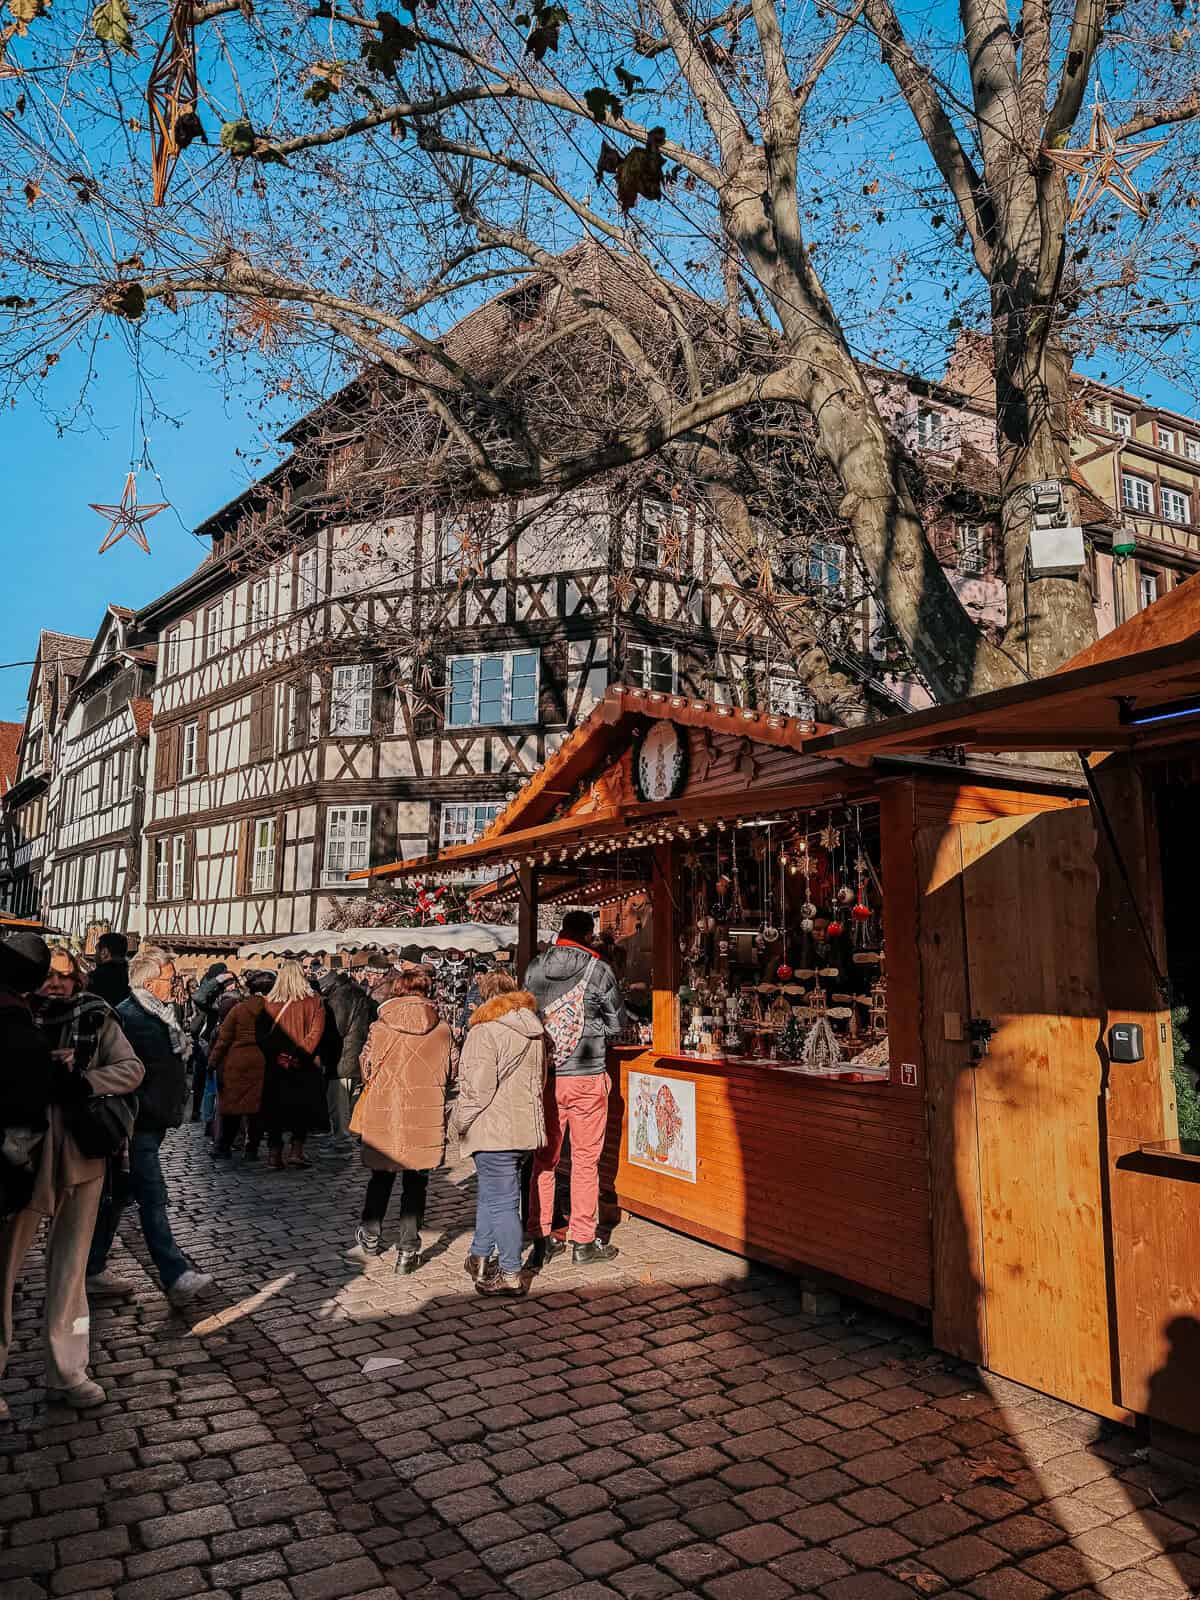 A vibrant and crowded Christmas market in a historic square, surrounded by traditional timber-framed buildings and festive decorations